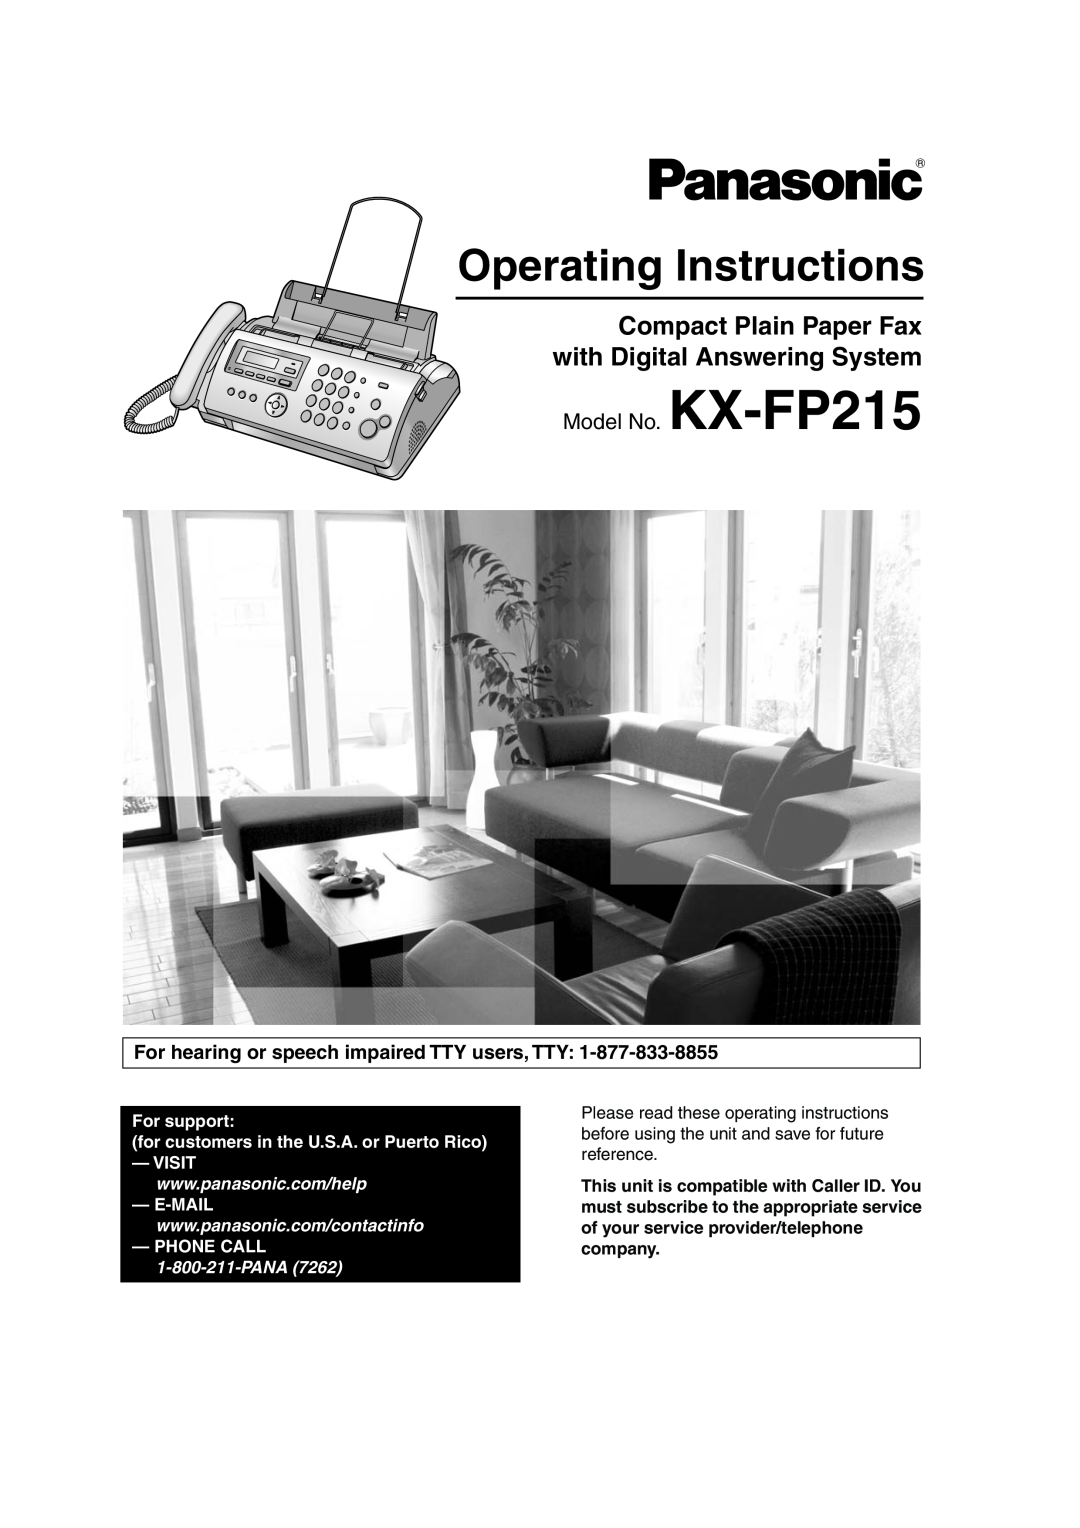 Panasonic KX-FP215 operating instructions Compact Plain Paper Fax with Digital Answering System, Operating Instructions 